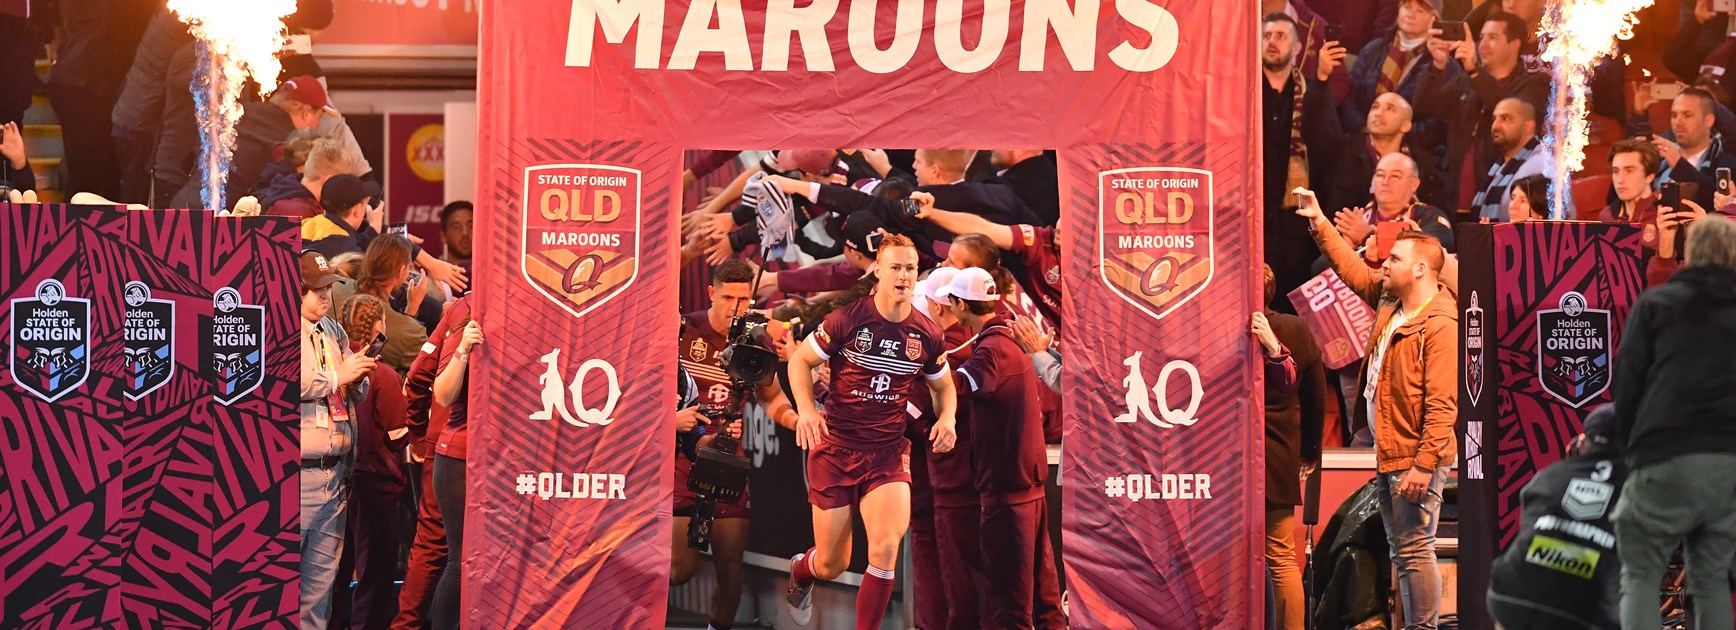 Maroons get fantastic boost with crowd limit removed at Suncorp